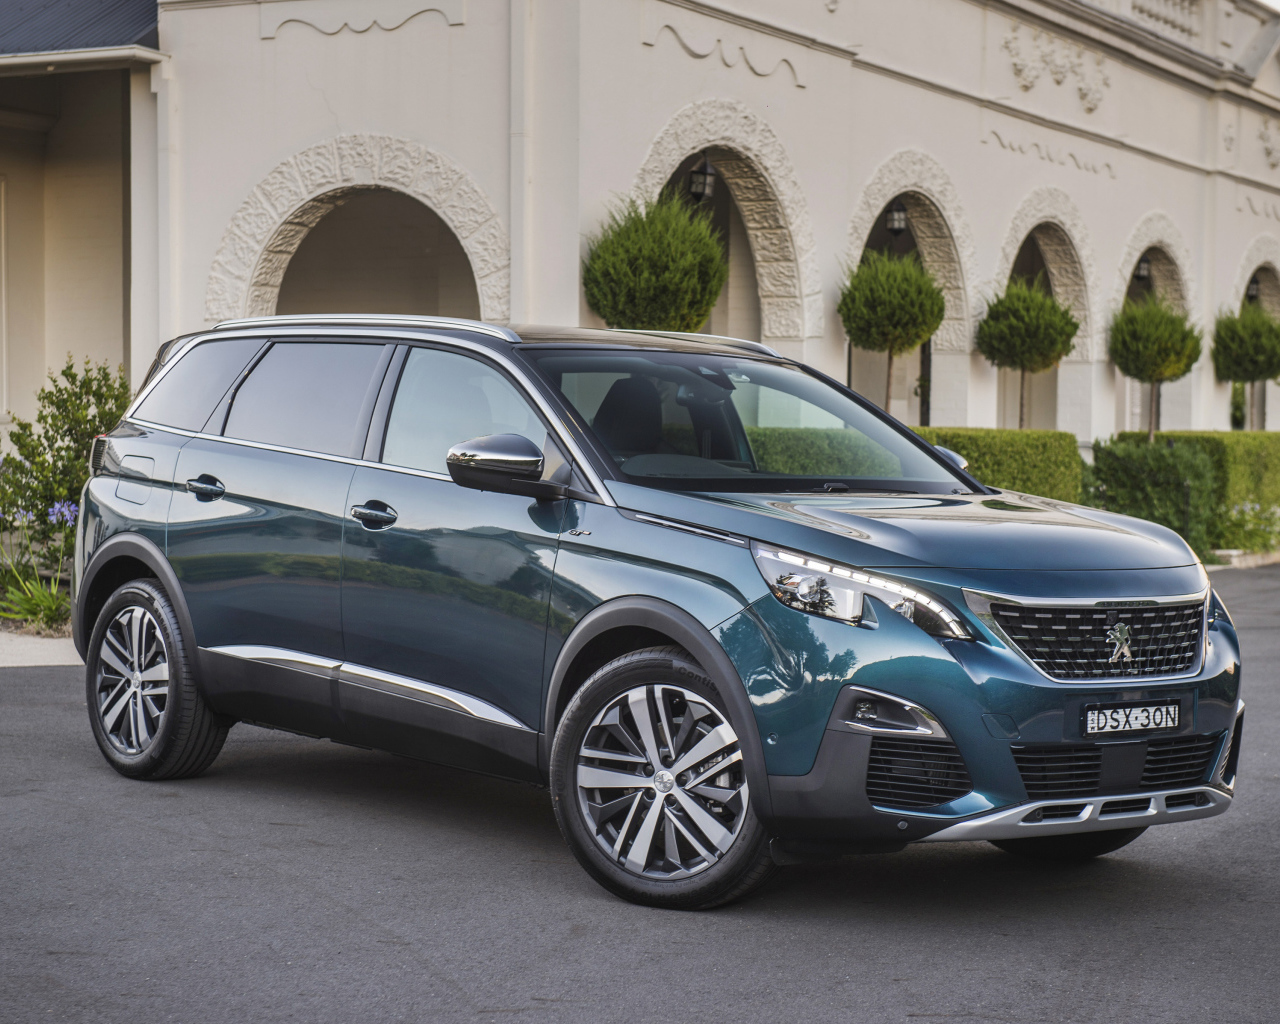 Peugeot 5008 GT, 2018 on the background of the building